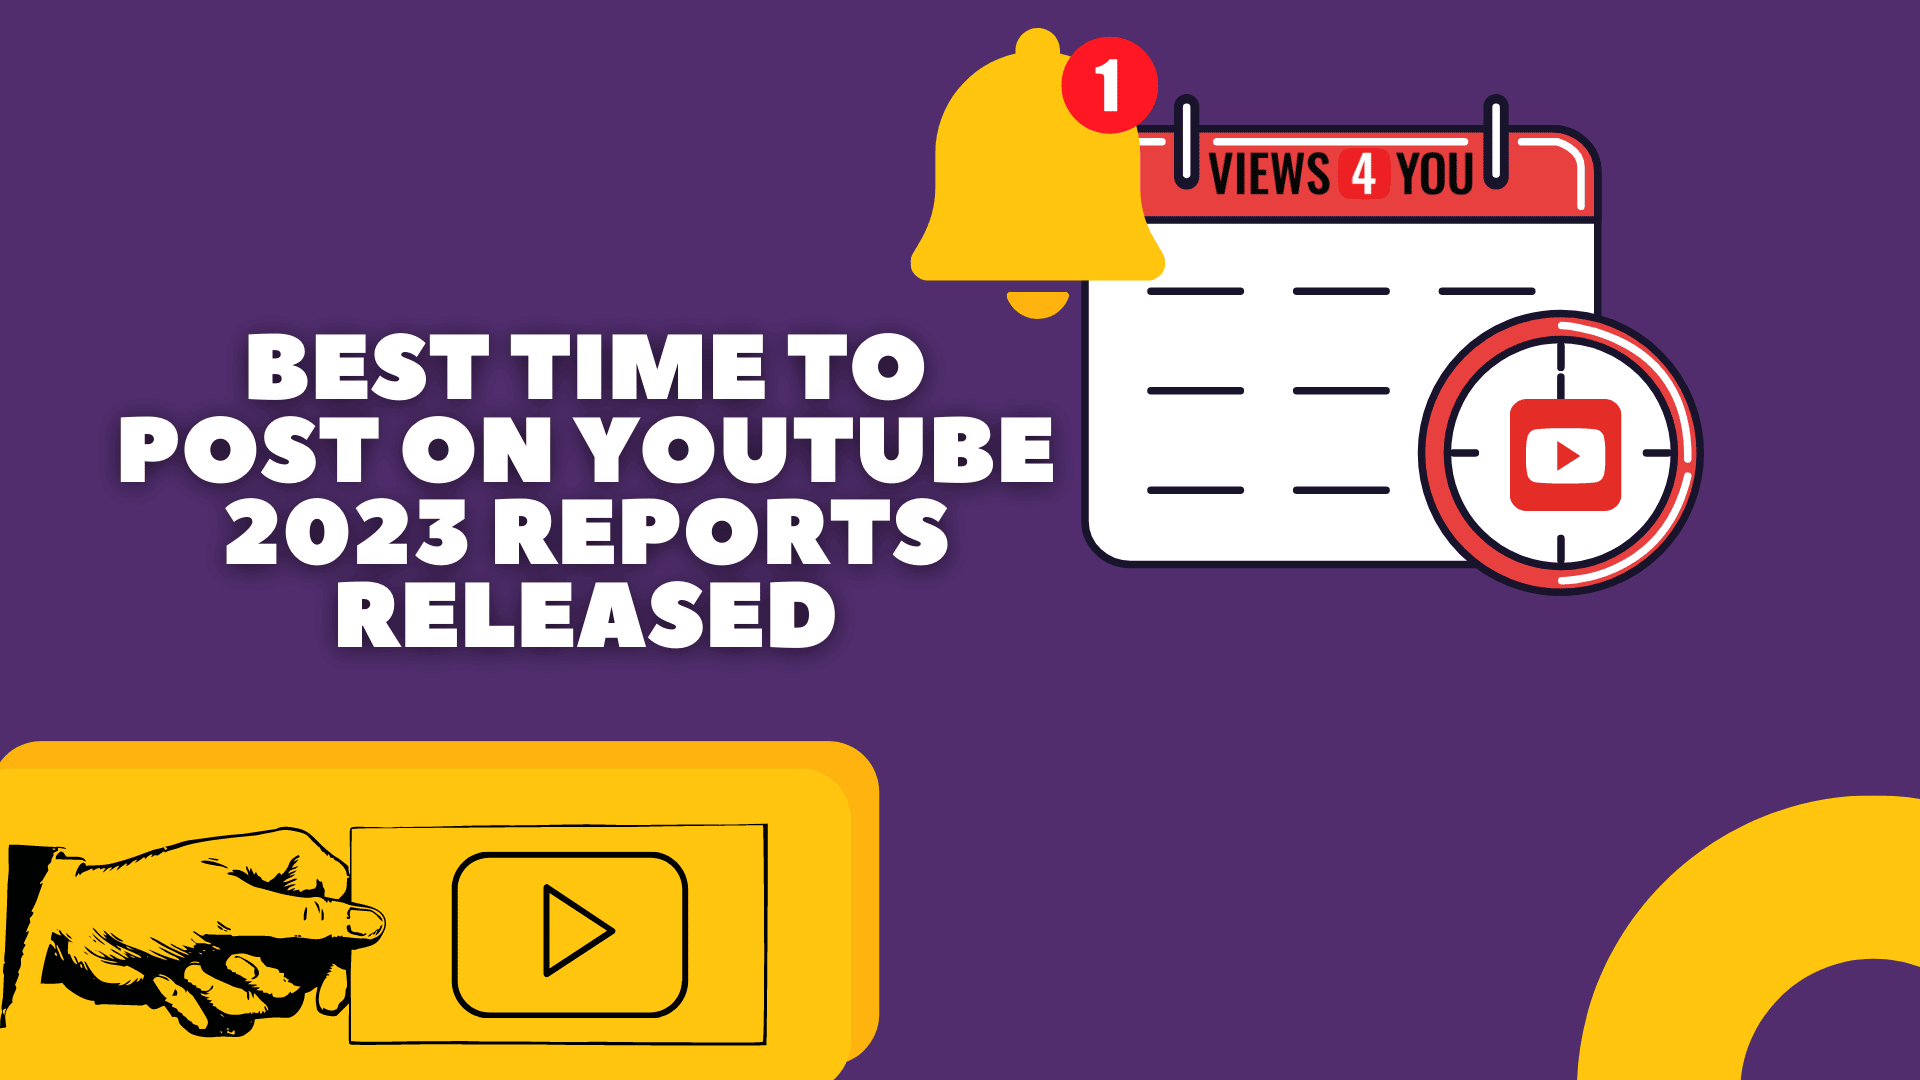 The Best Time to Post on YouTube – 2023 Reports Released